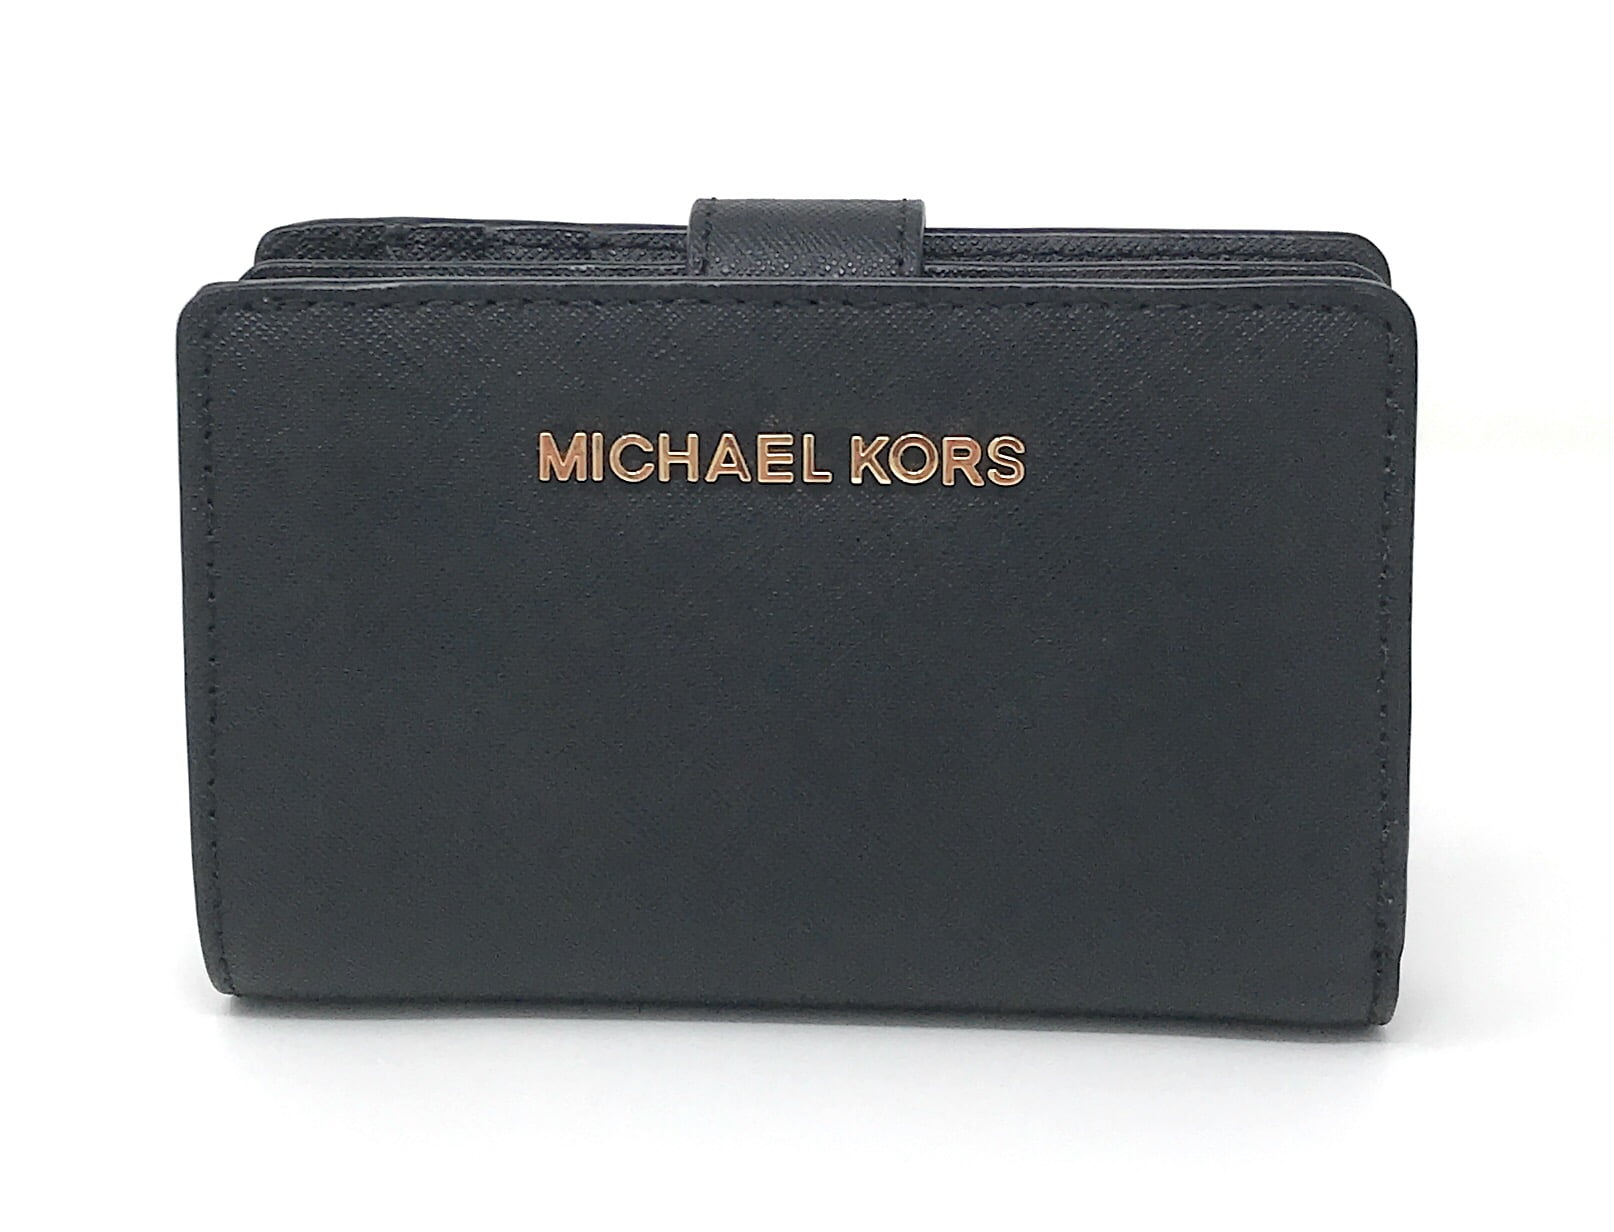 SOLD OUT • MICHAEL KORS Jet Set Travel Large Saffiano Leather Quarter-Zip  Wallet — Php5200 via aircargo A compact accessory with maximum…